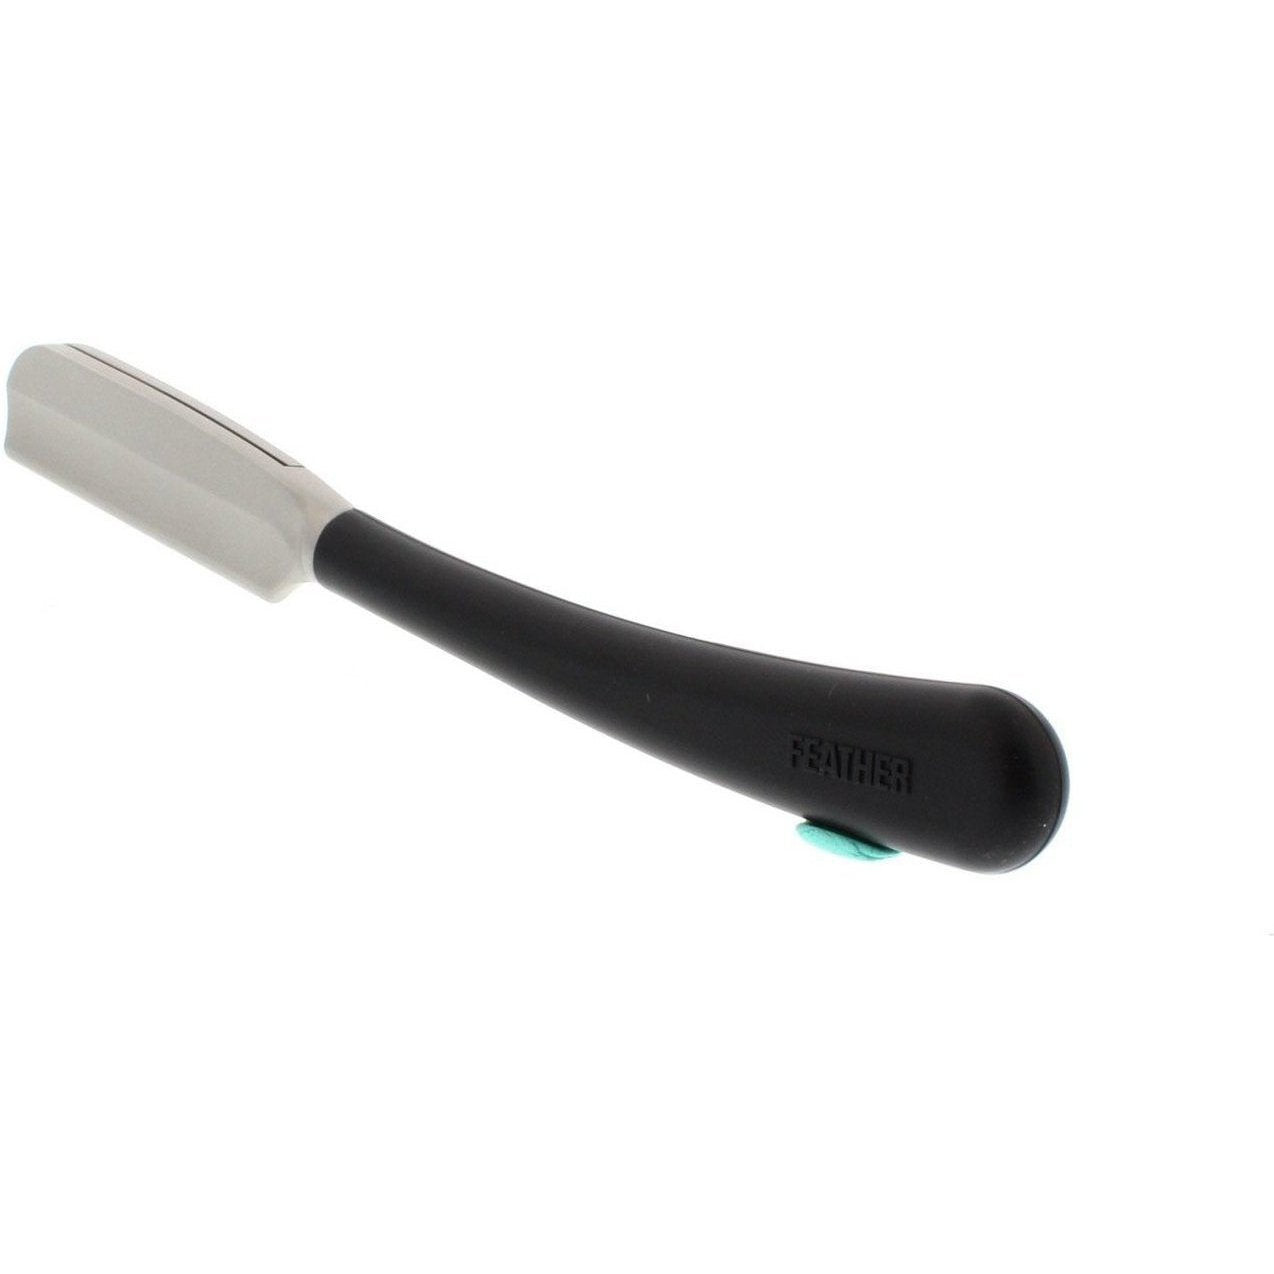 Product image 2 for Feather Artist Club SS Japanese Razor, Black